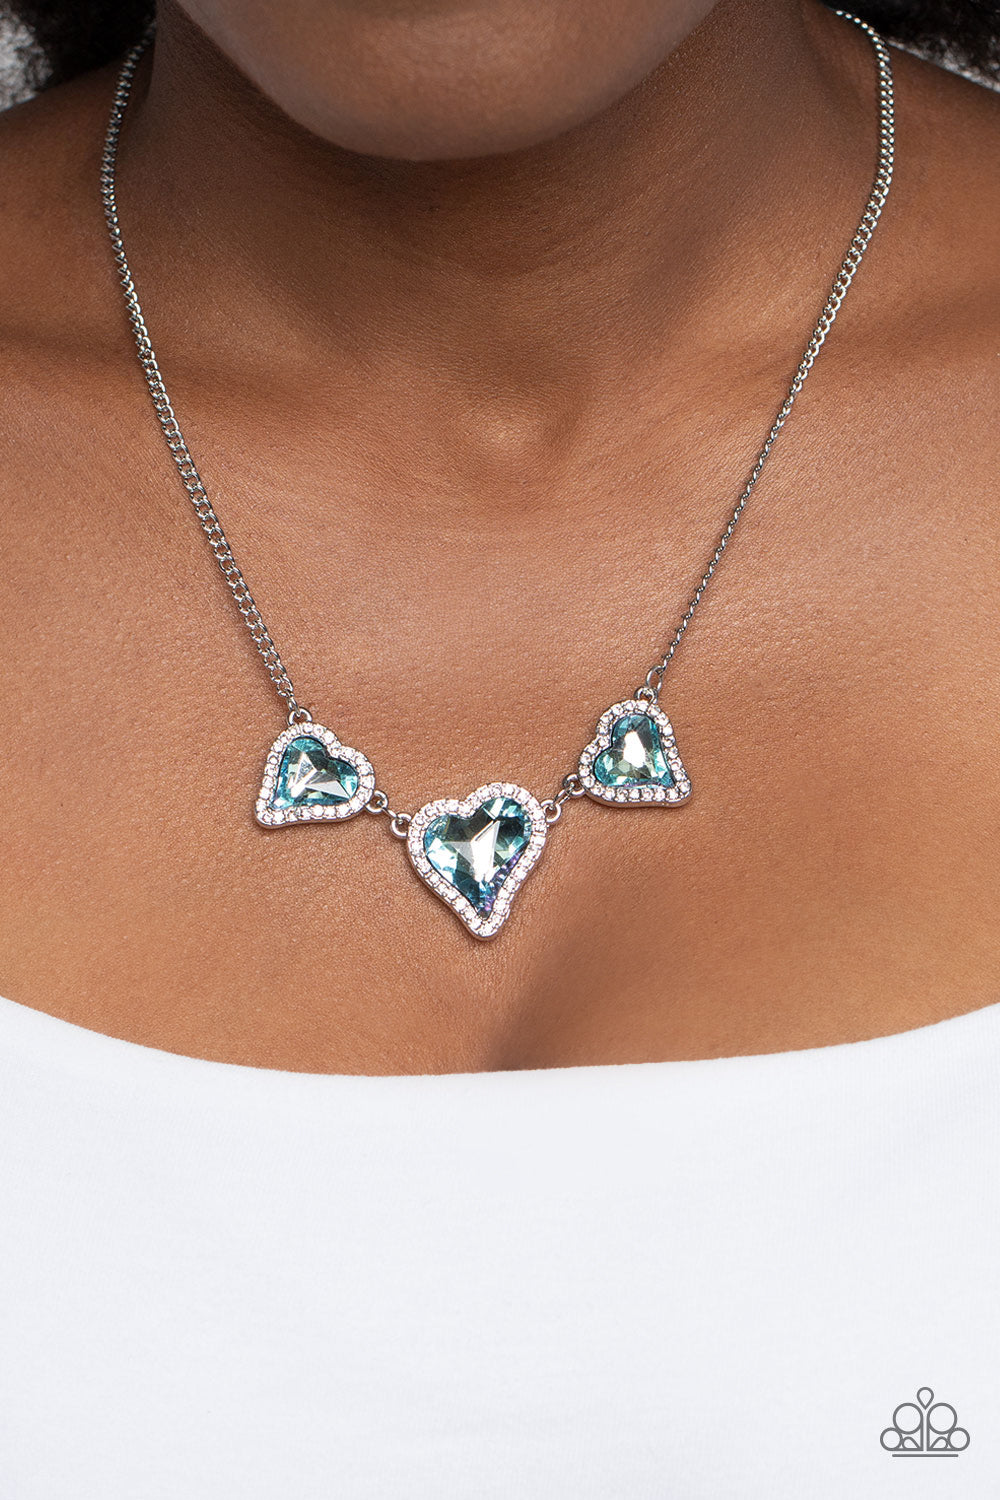 Paparazzi Necklaces - State of the HEART - Blue